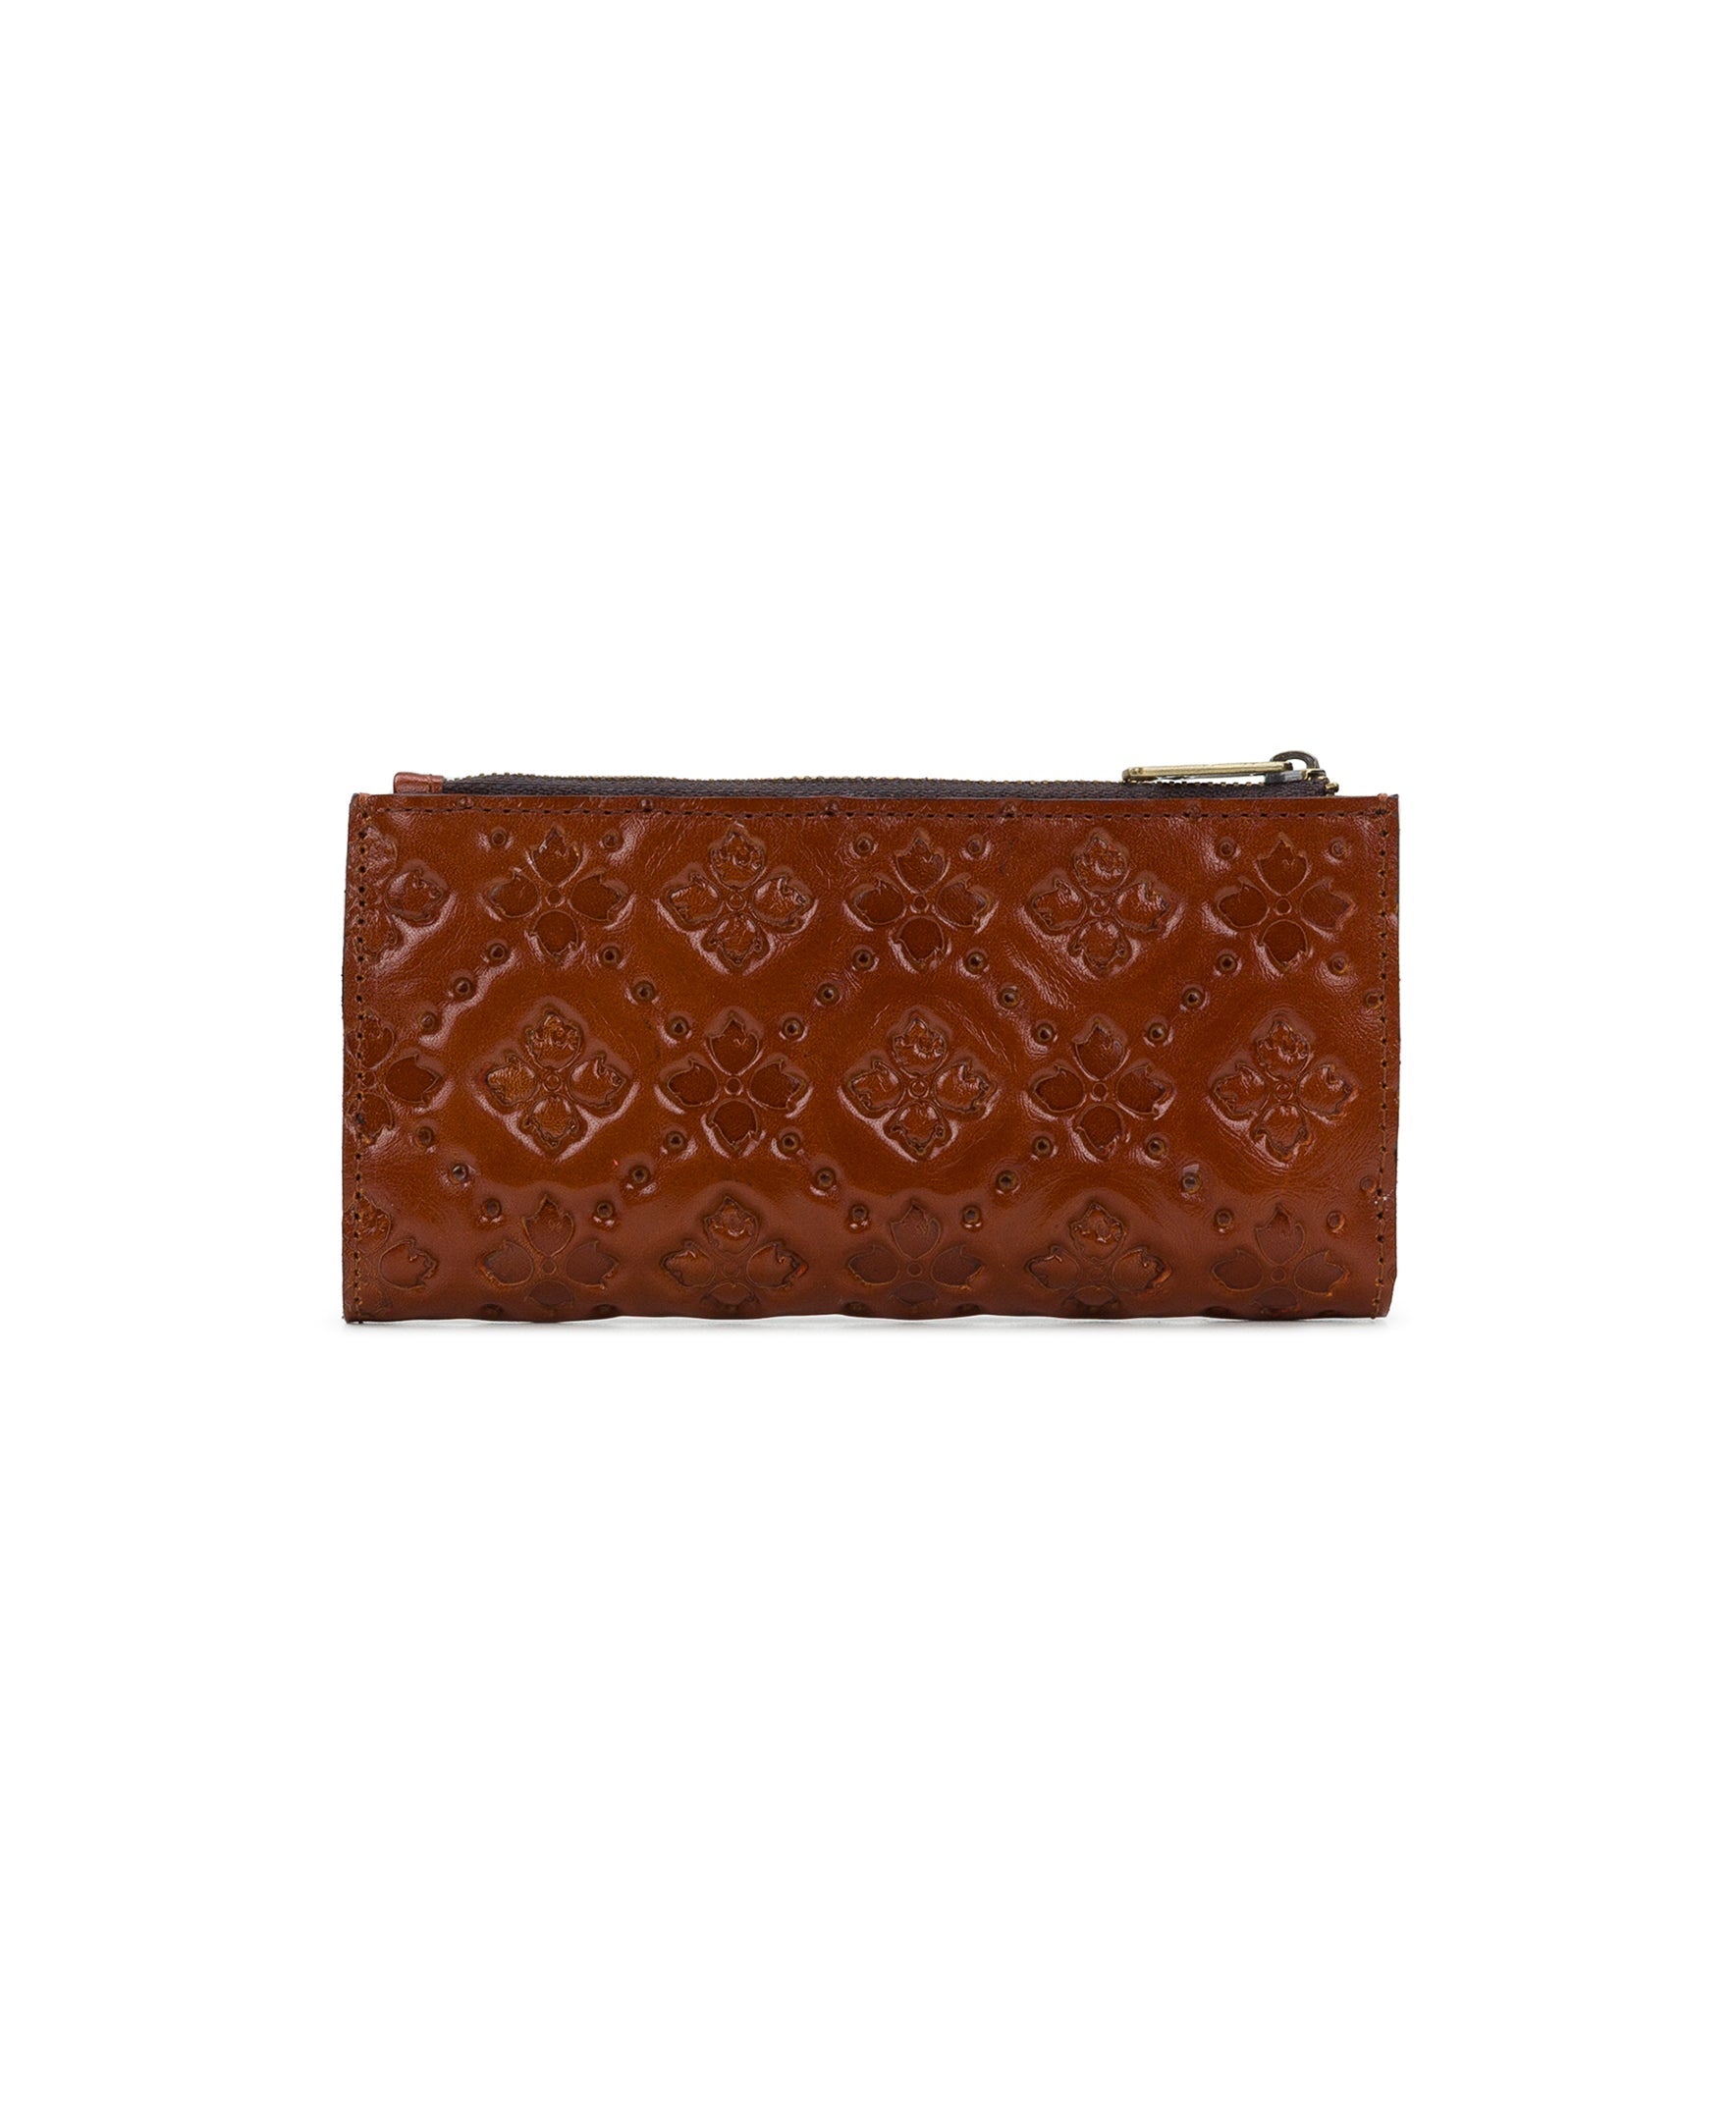 Nazari Wallet - Vintage Signature Embossed Quilted – Patricia Nash